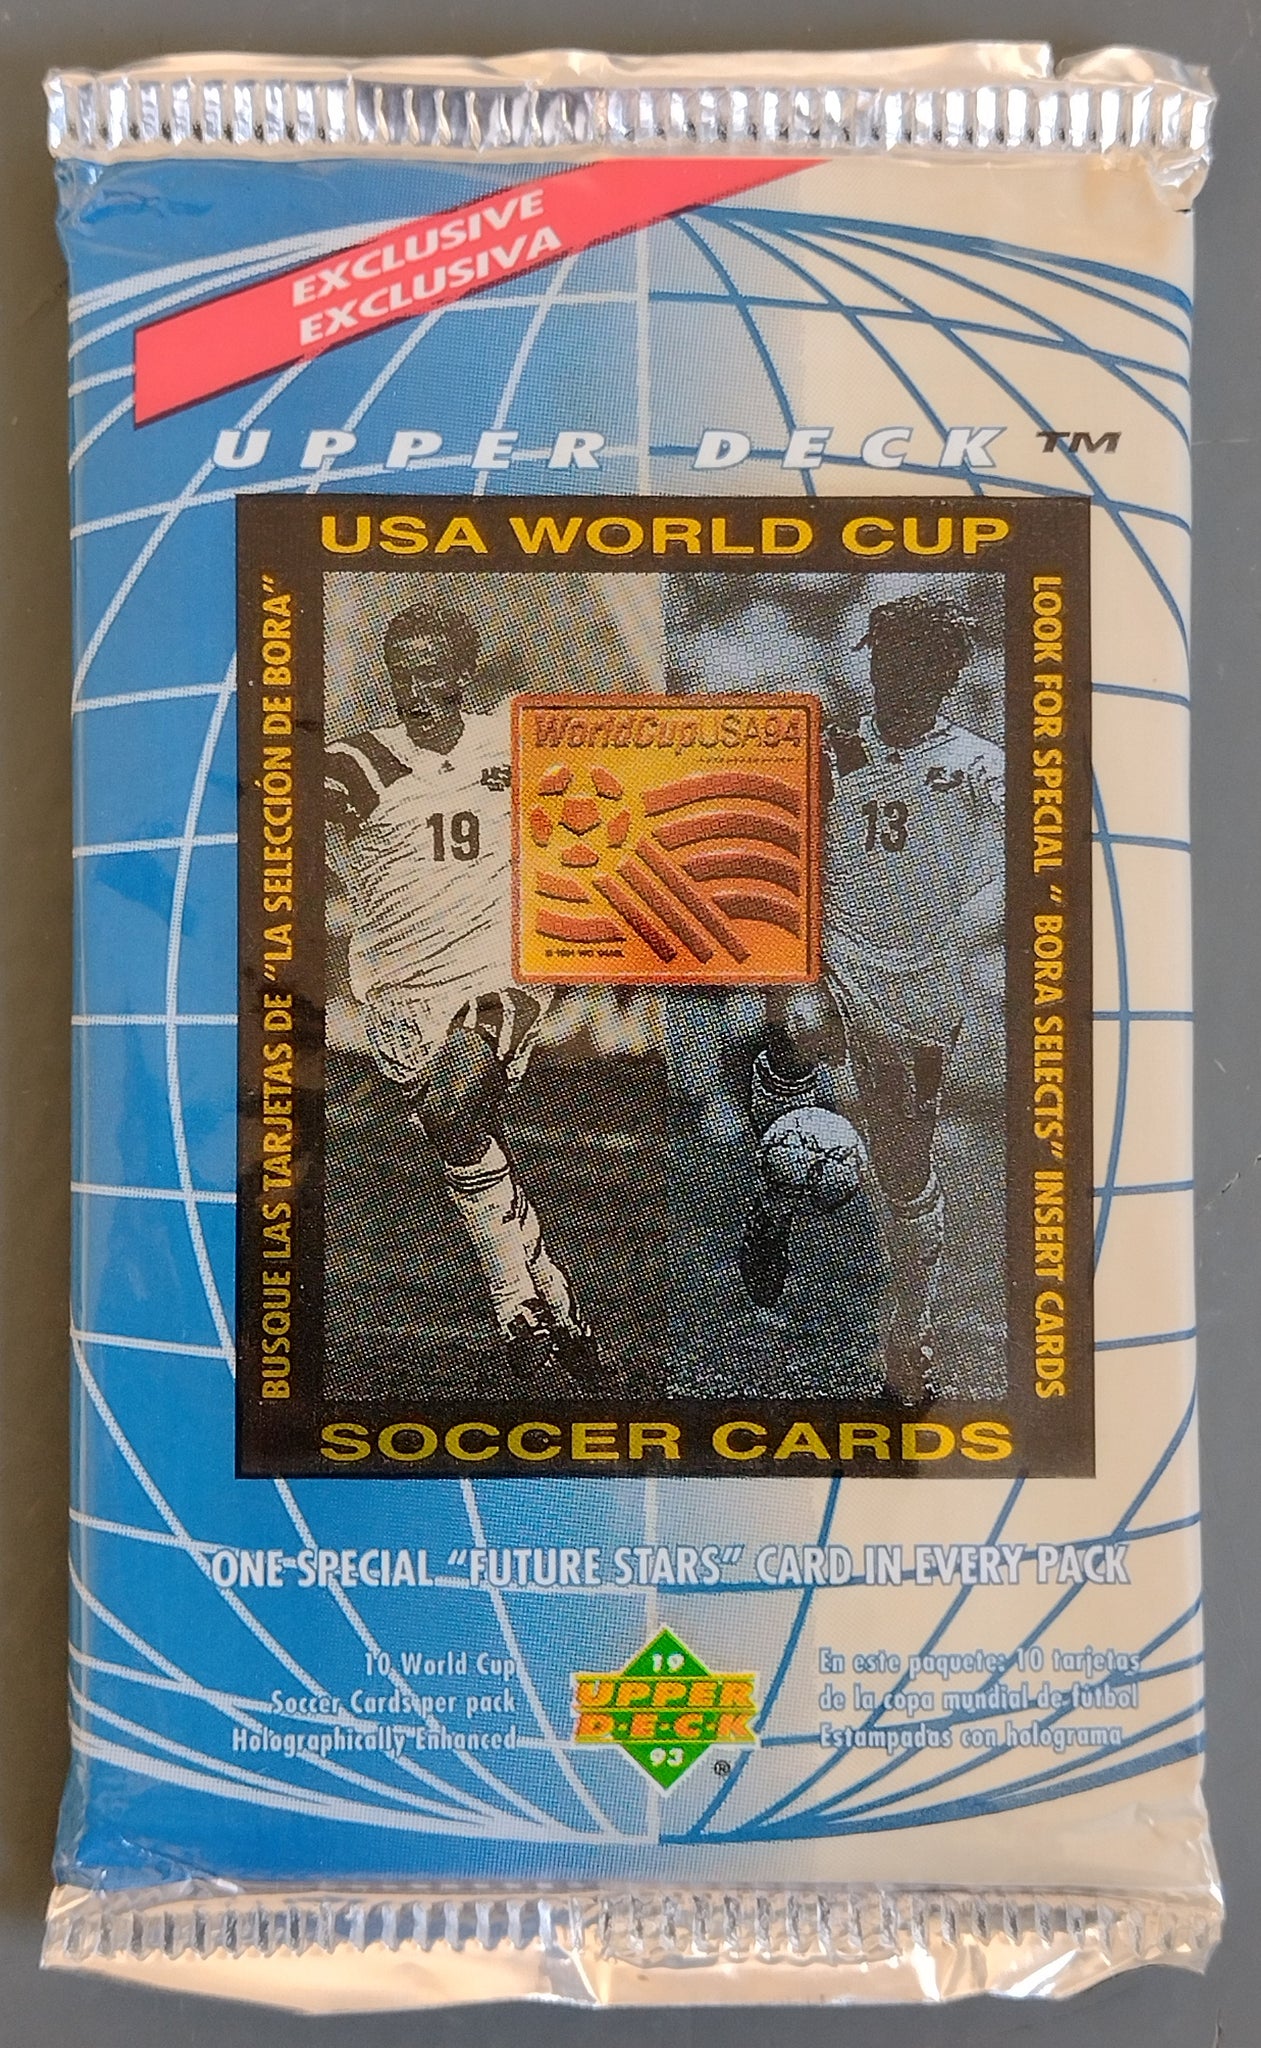 Upper Deck World Cup 94 Trading Card Pack (Blue)